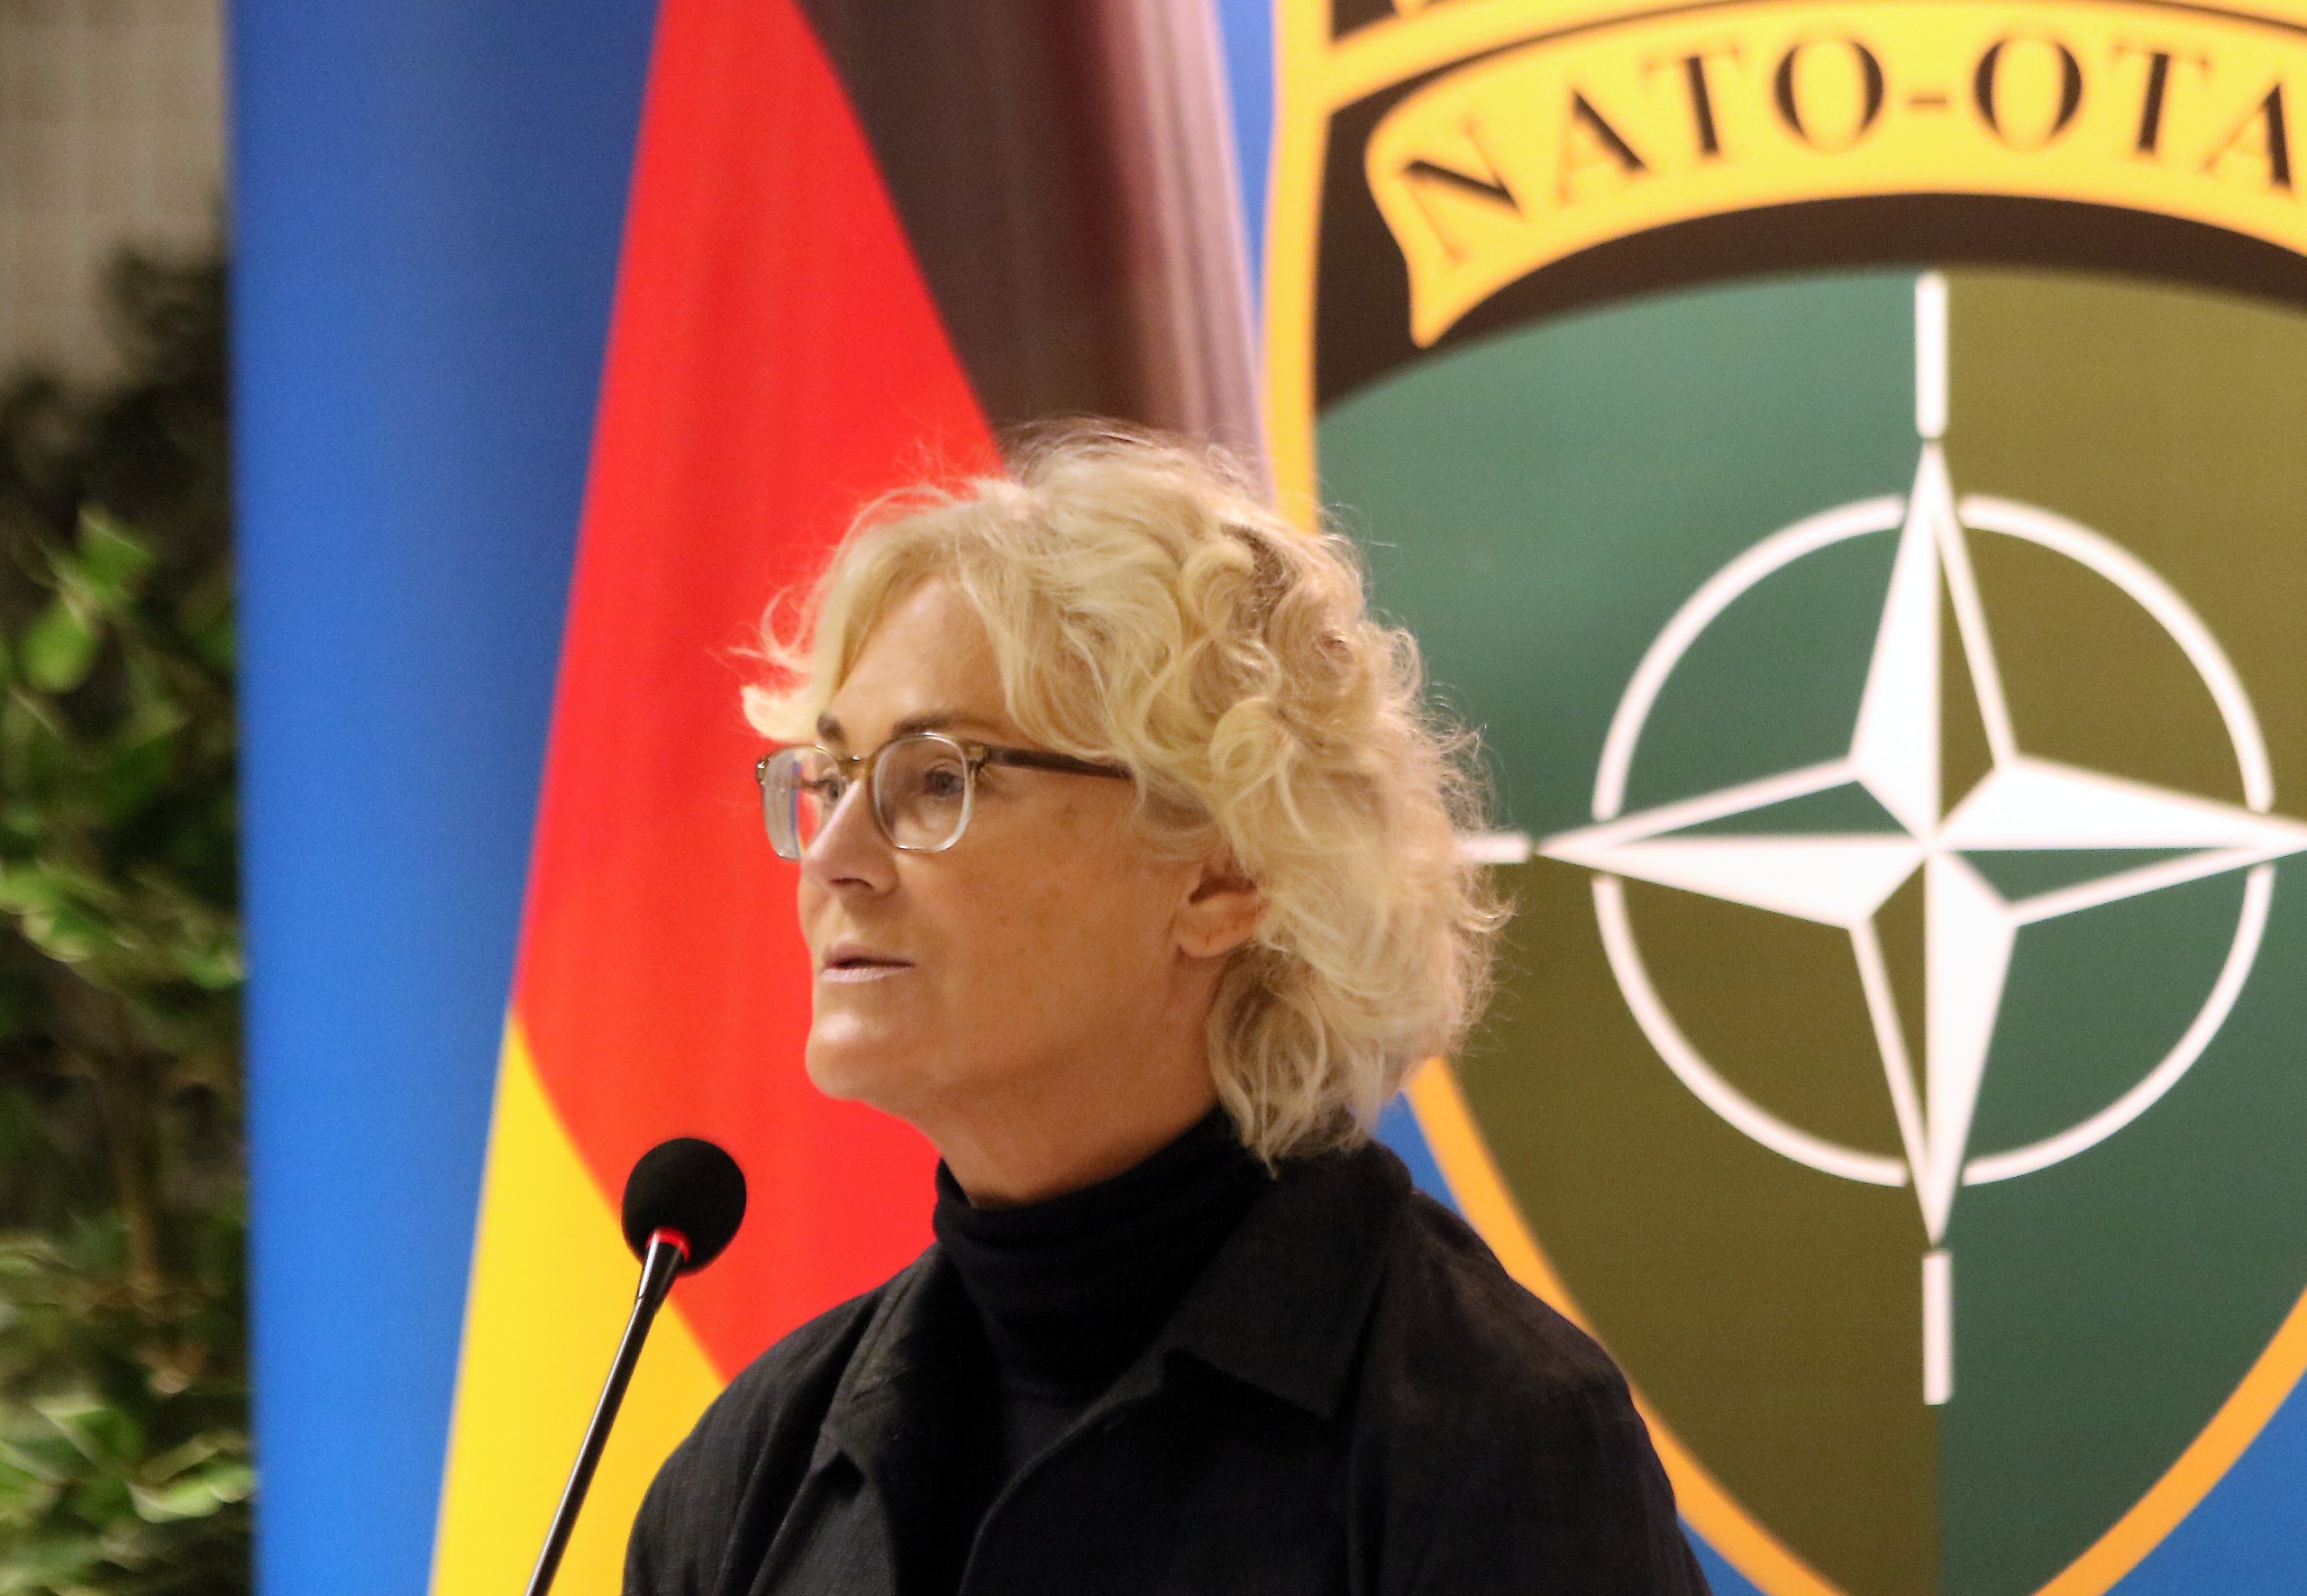 epa09649803 German Defence Minister Christine Lambrecht attends a press conference after her meeting with Lithuanian Defence Minister Arvydas Anusauskas (not seen) in Rukla, Lithuania, 19 December 2021. The ministers discussed the regional security situation, as well as Lithuania and Germany bilateral ties. German Defence Minister Christine Lambrecht also visited German troops stationed at the Lithuanian military base in Rukla as Germany leads the multi-national battalion in Lithuania.  EPA/STRINGER